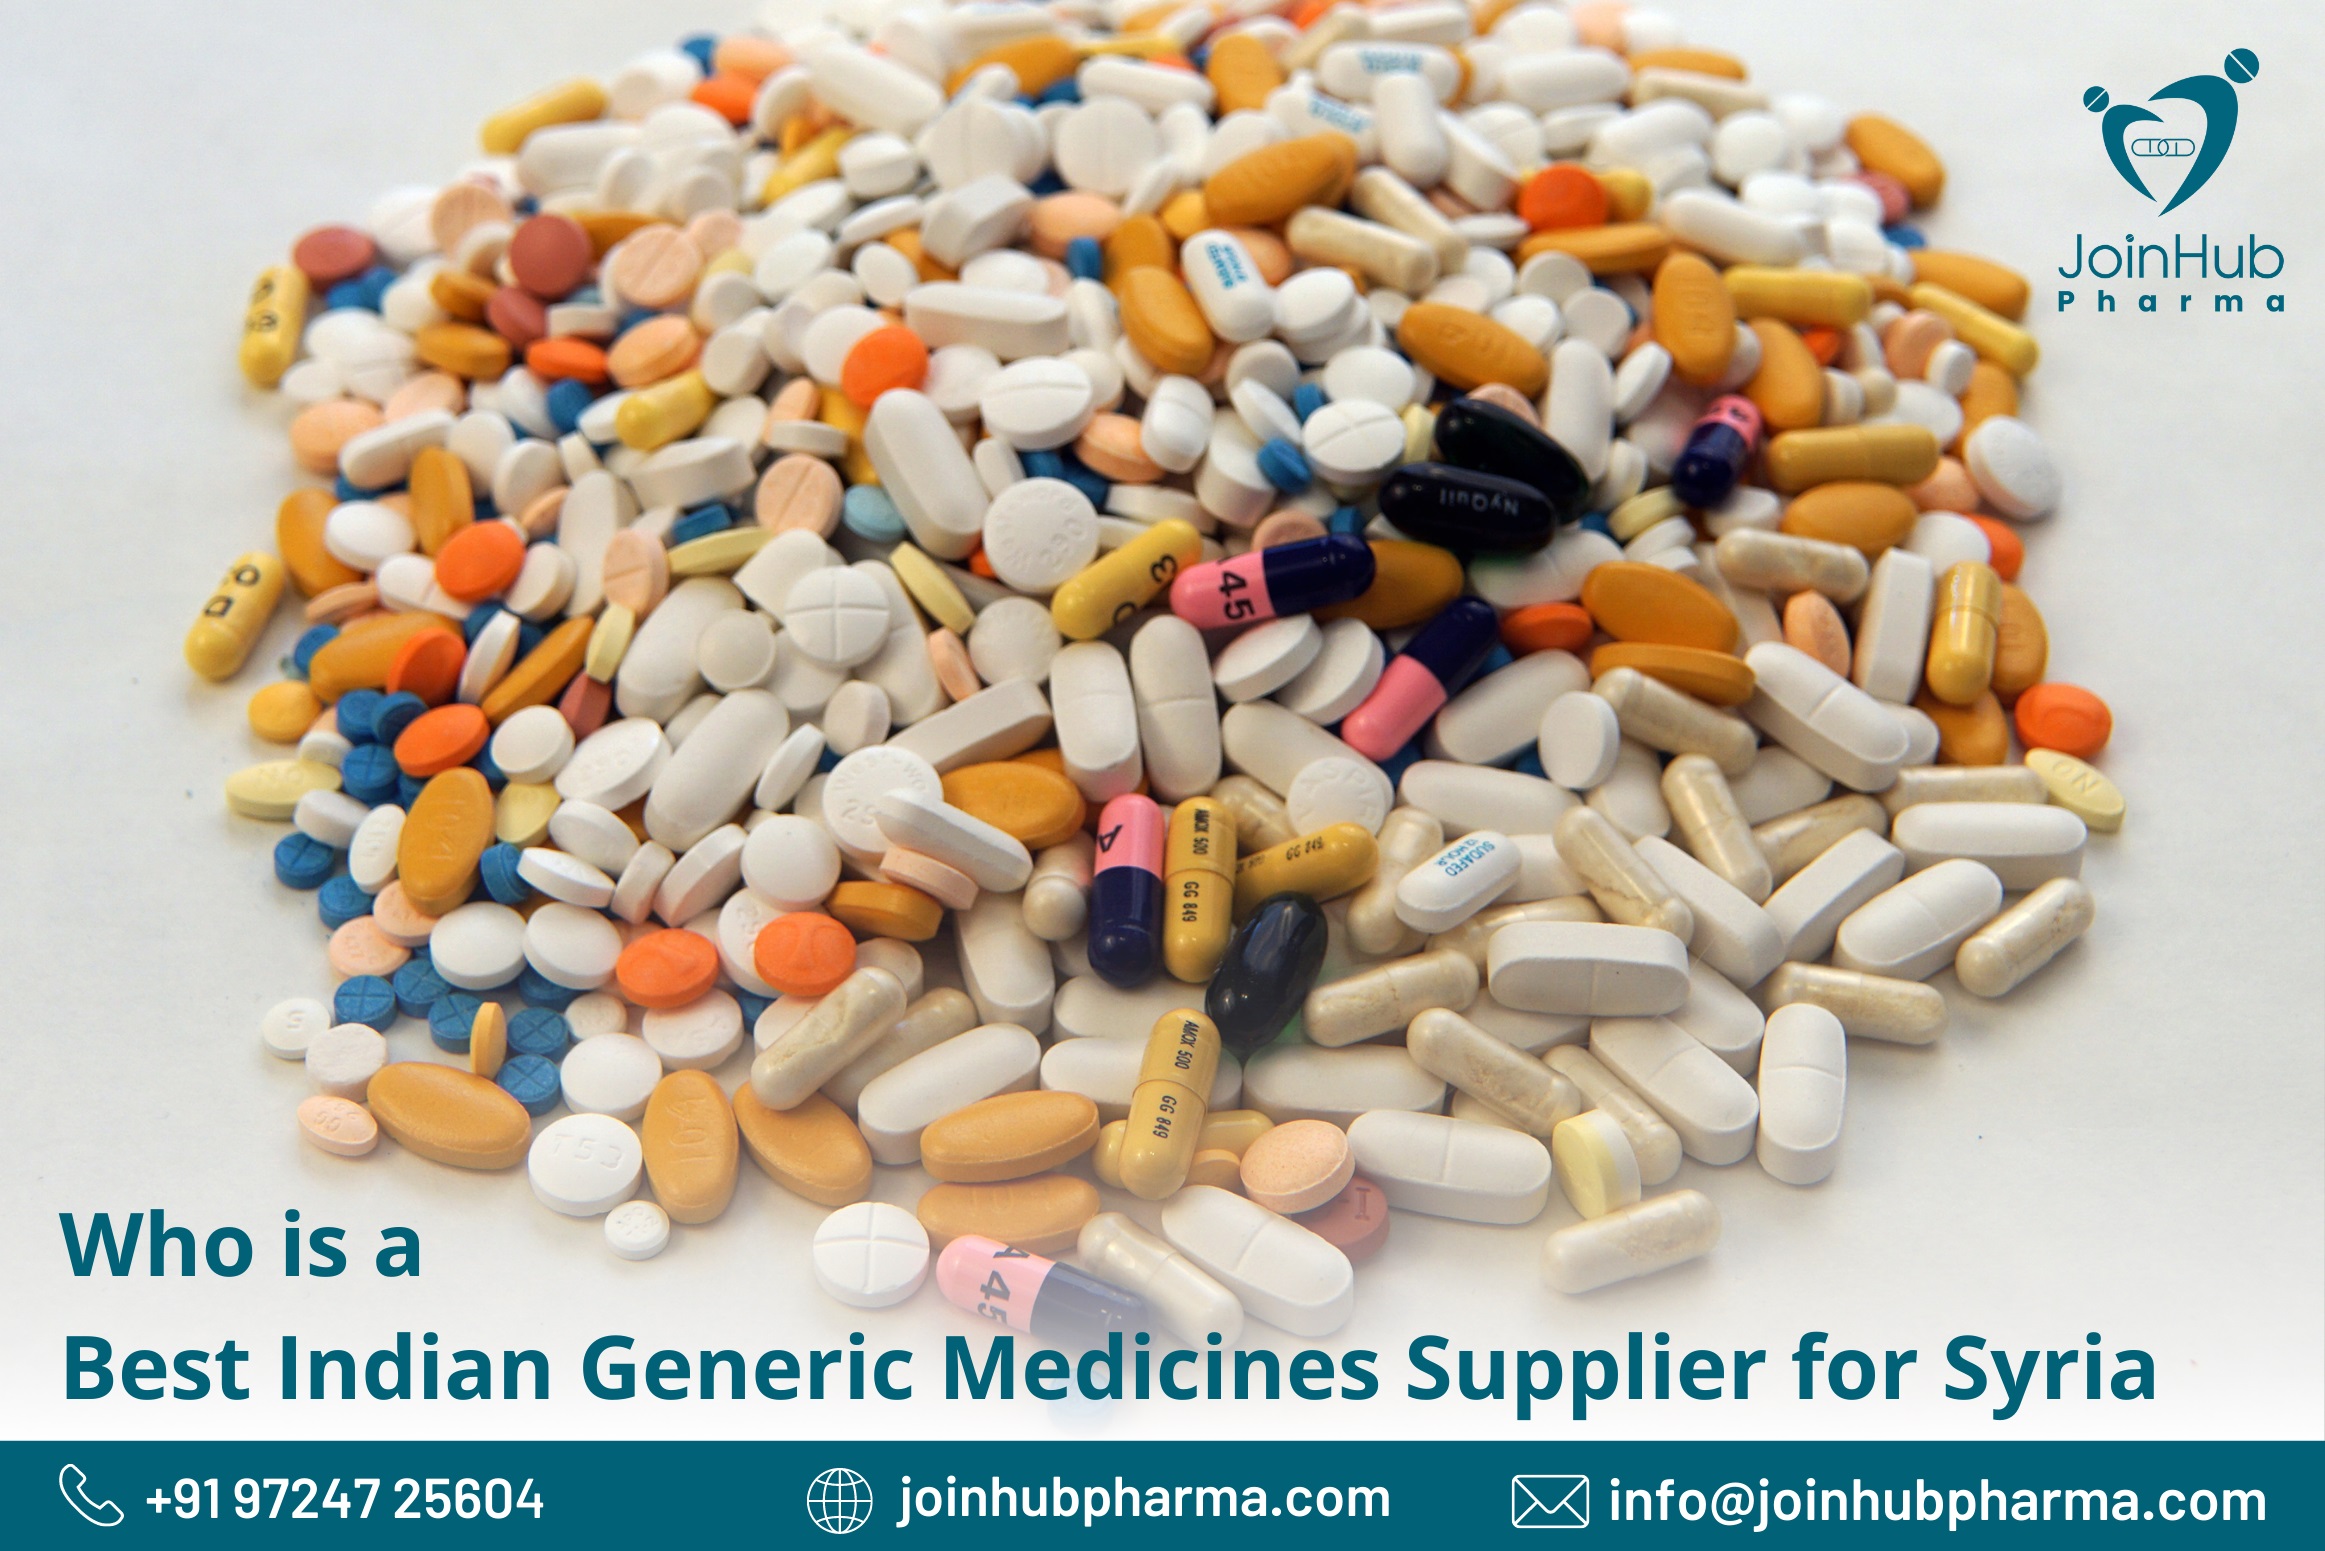 Who is the Best Indian generic medicines supplier for Syria?